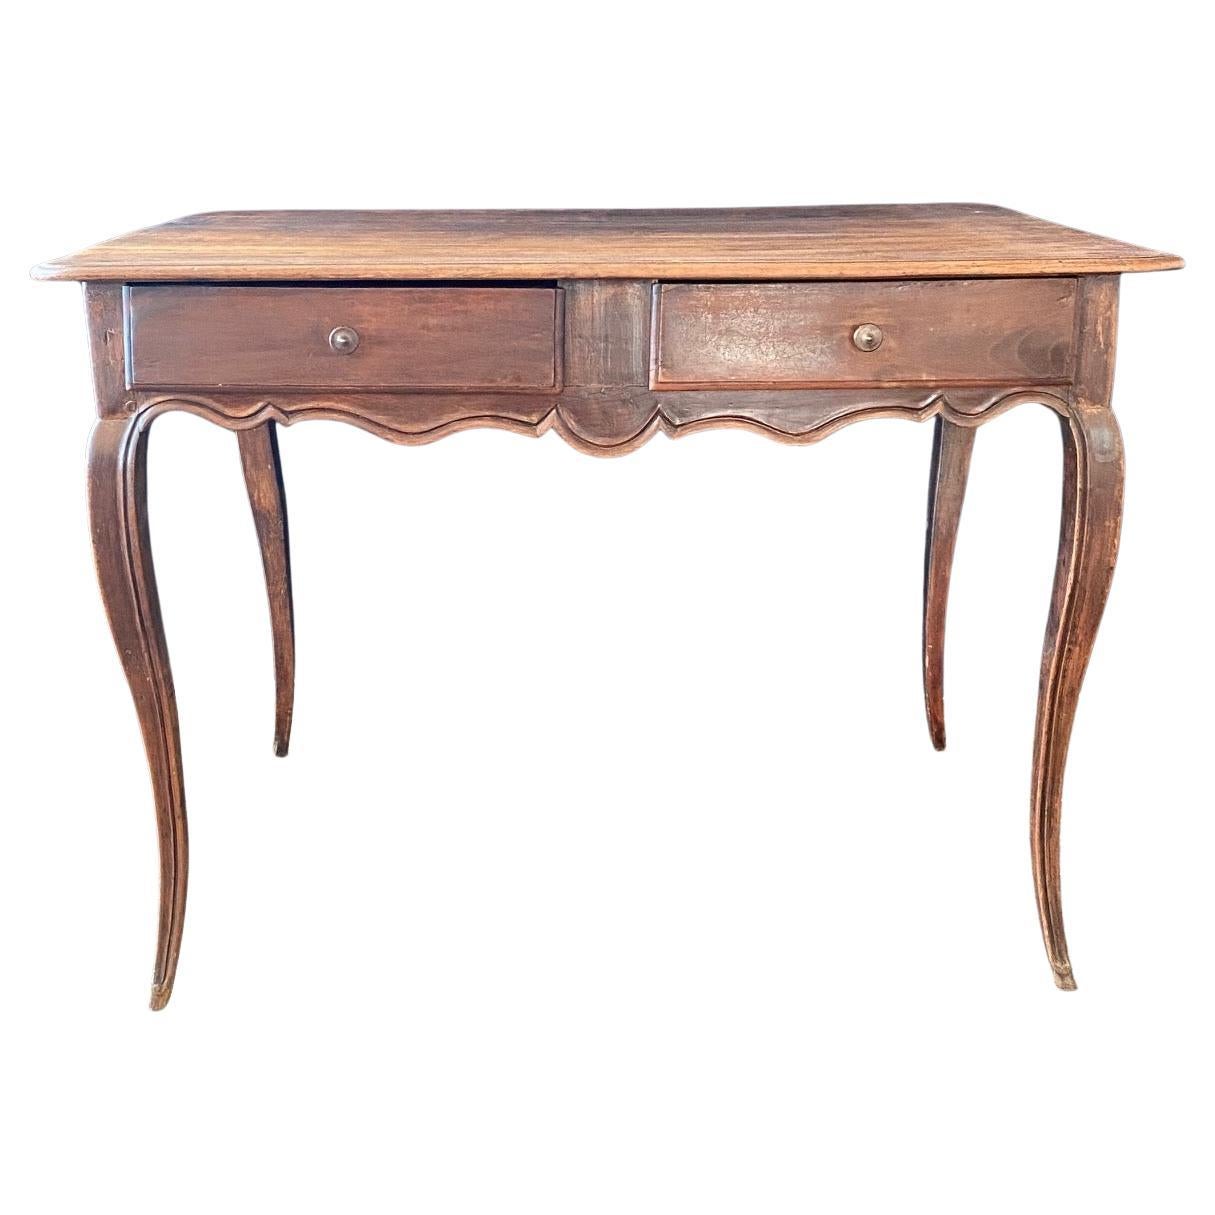 French Provincial Petite Desk or Side Table with 4 Sided Scalloped Apron  For Sale